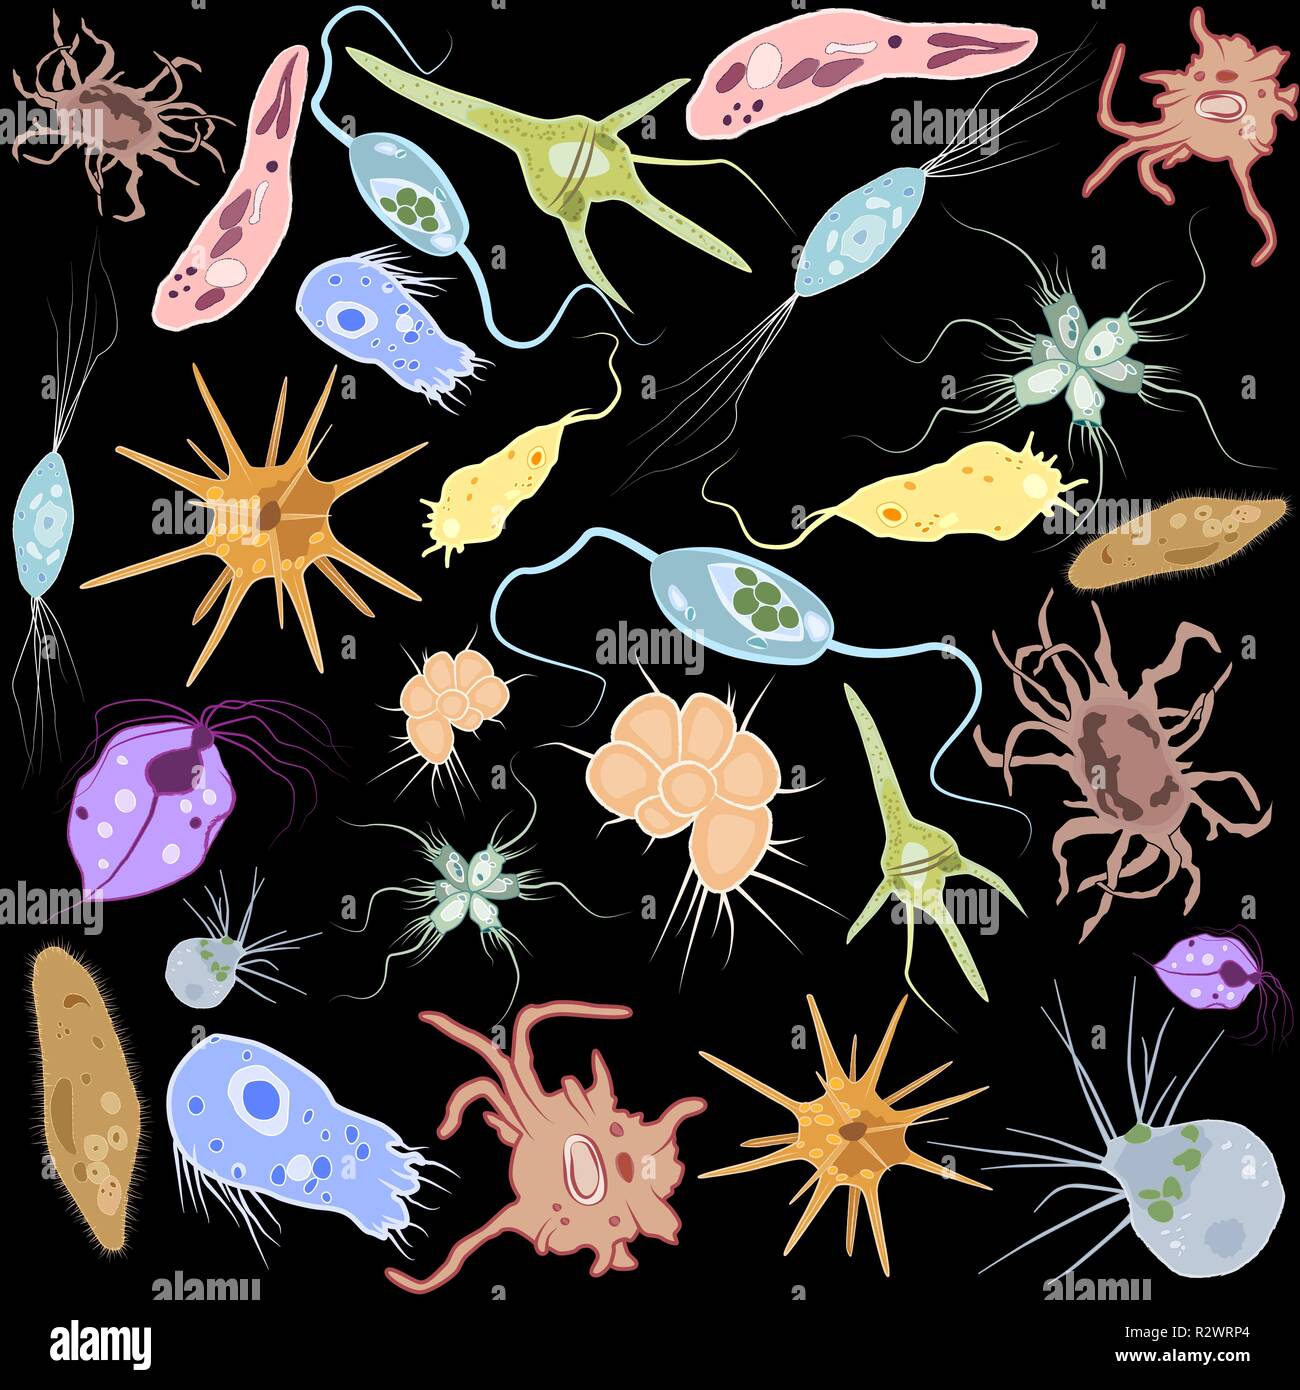 Set of different single-celled eukaryote  Protozoas, Vector illustration Stock Vector